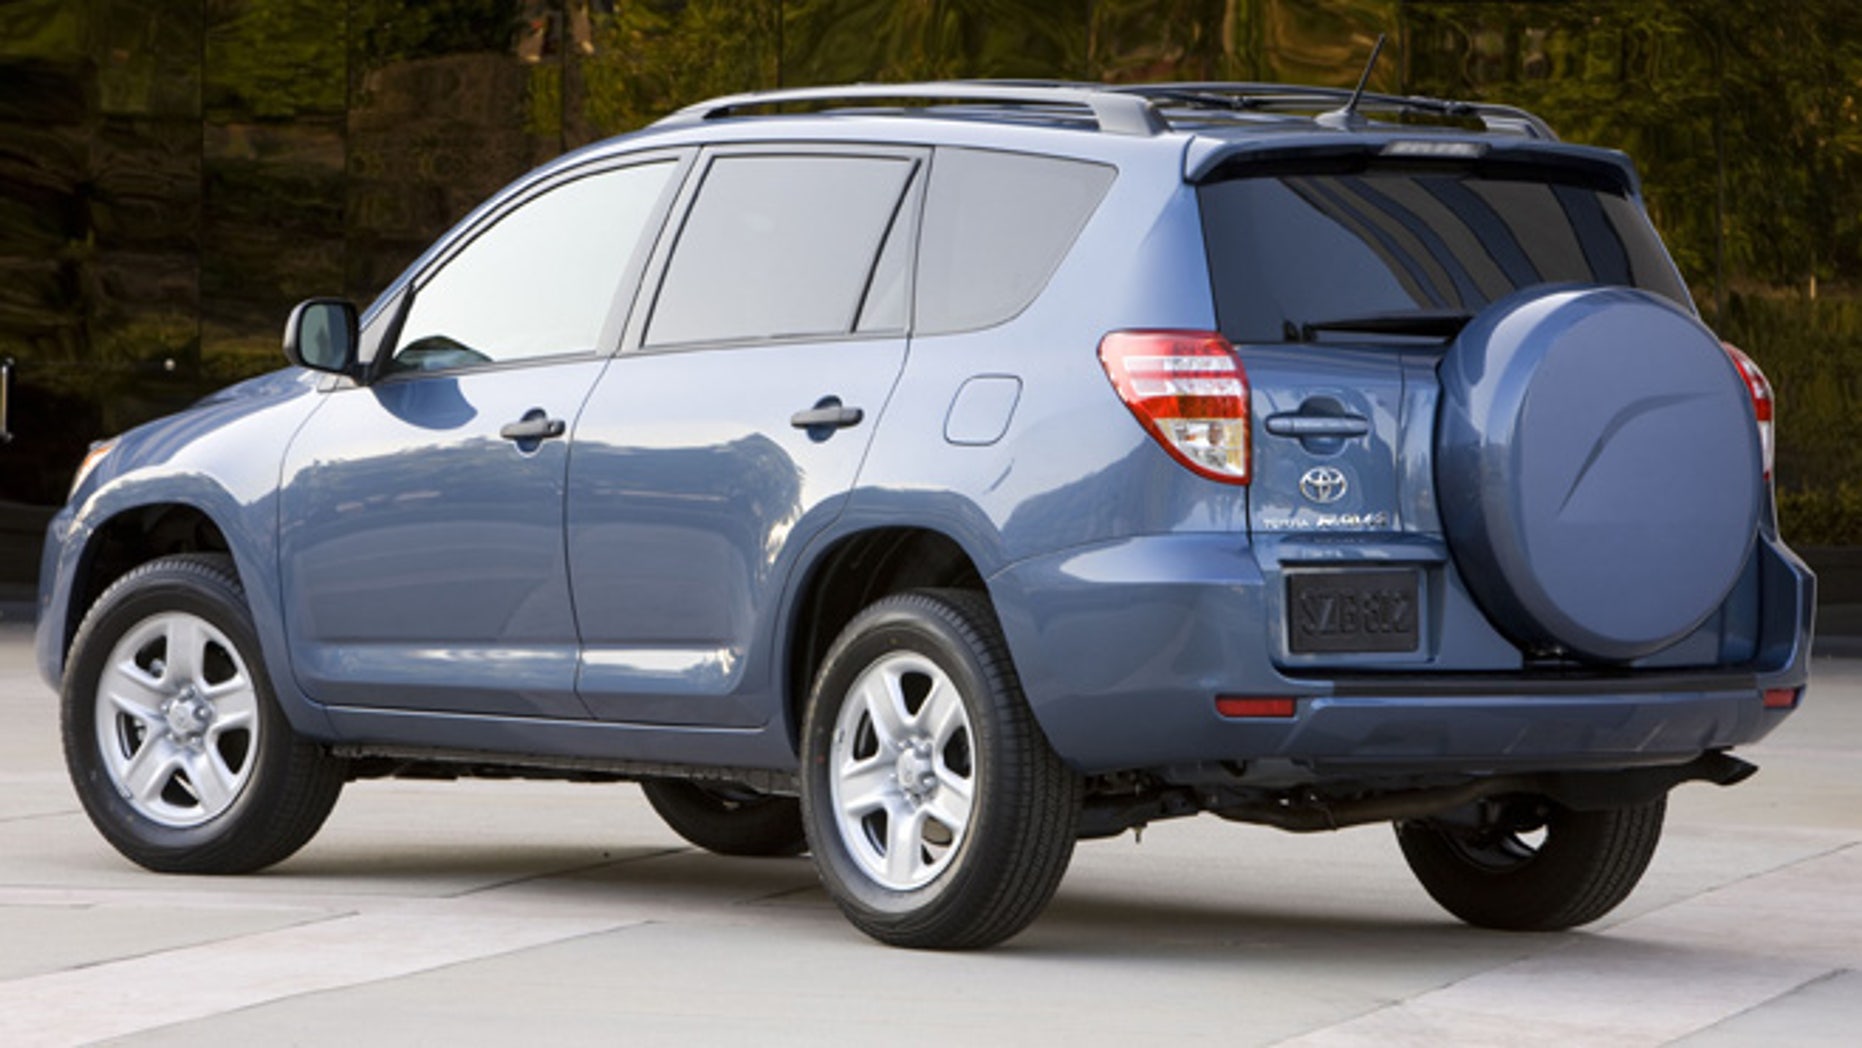 2014 Toyota Rav4 said to be losing iconic spare tire carrier Fox News